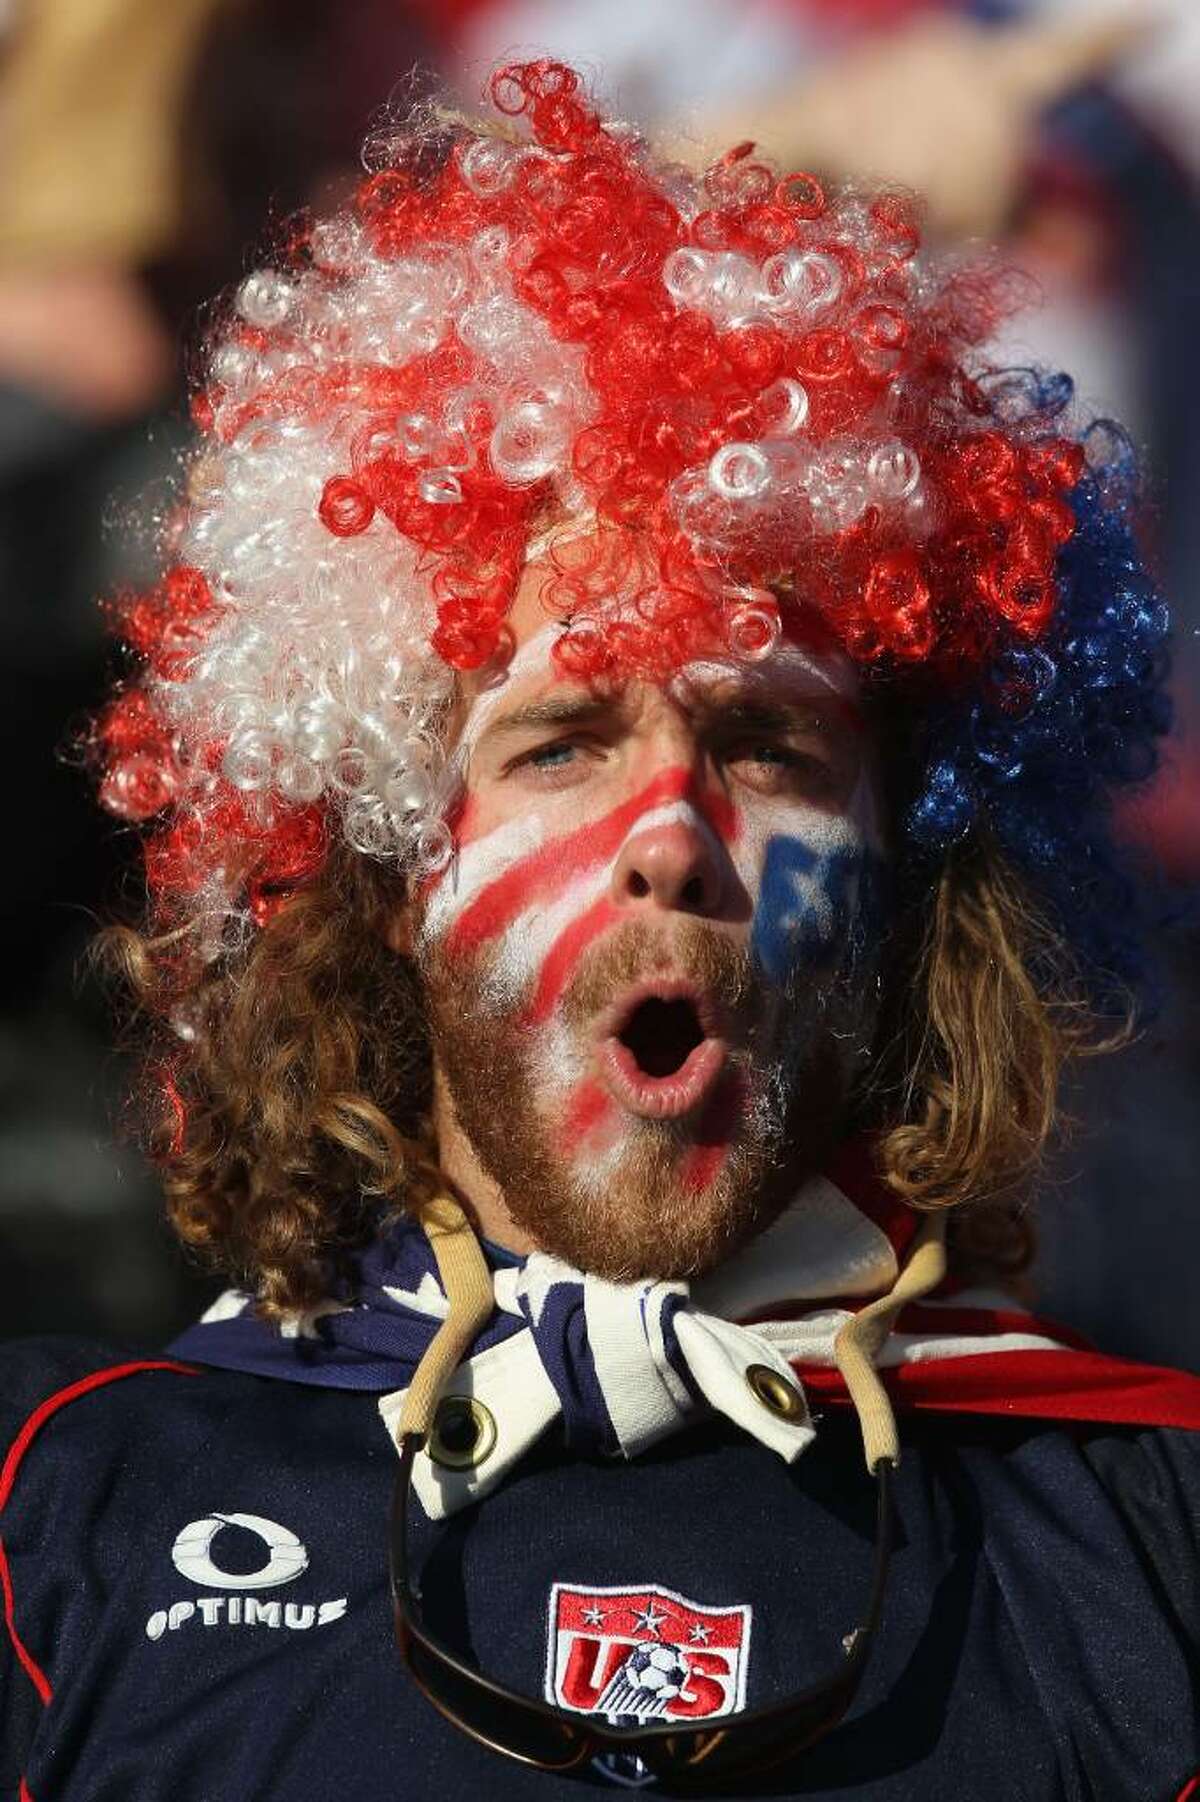 JOHANNESBURG, SOUTH AFRICA - JUNE 18: A USA fan enjoys the atmosphere during the 2010 FIFA World Cup South Africa Group C match between Slovenia and USA at Ellis Park Stadium on June 18, 2010 in Johannesburg, South Africa. (Photo by Streeter Lecka/Getty Images)